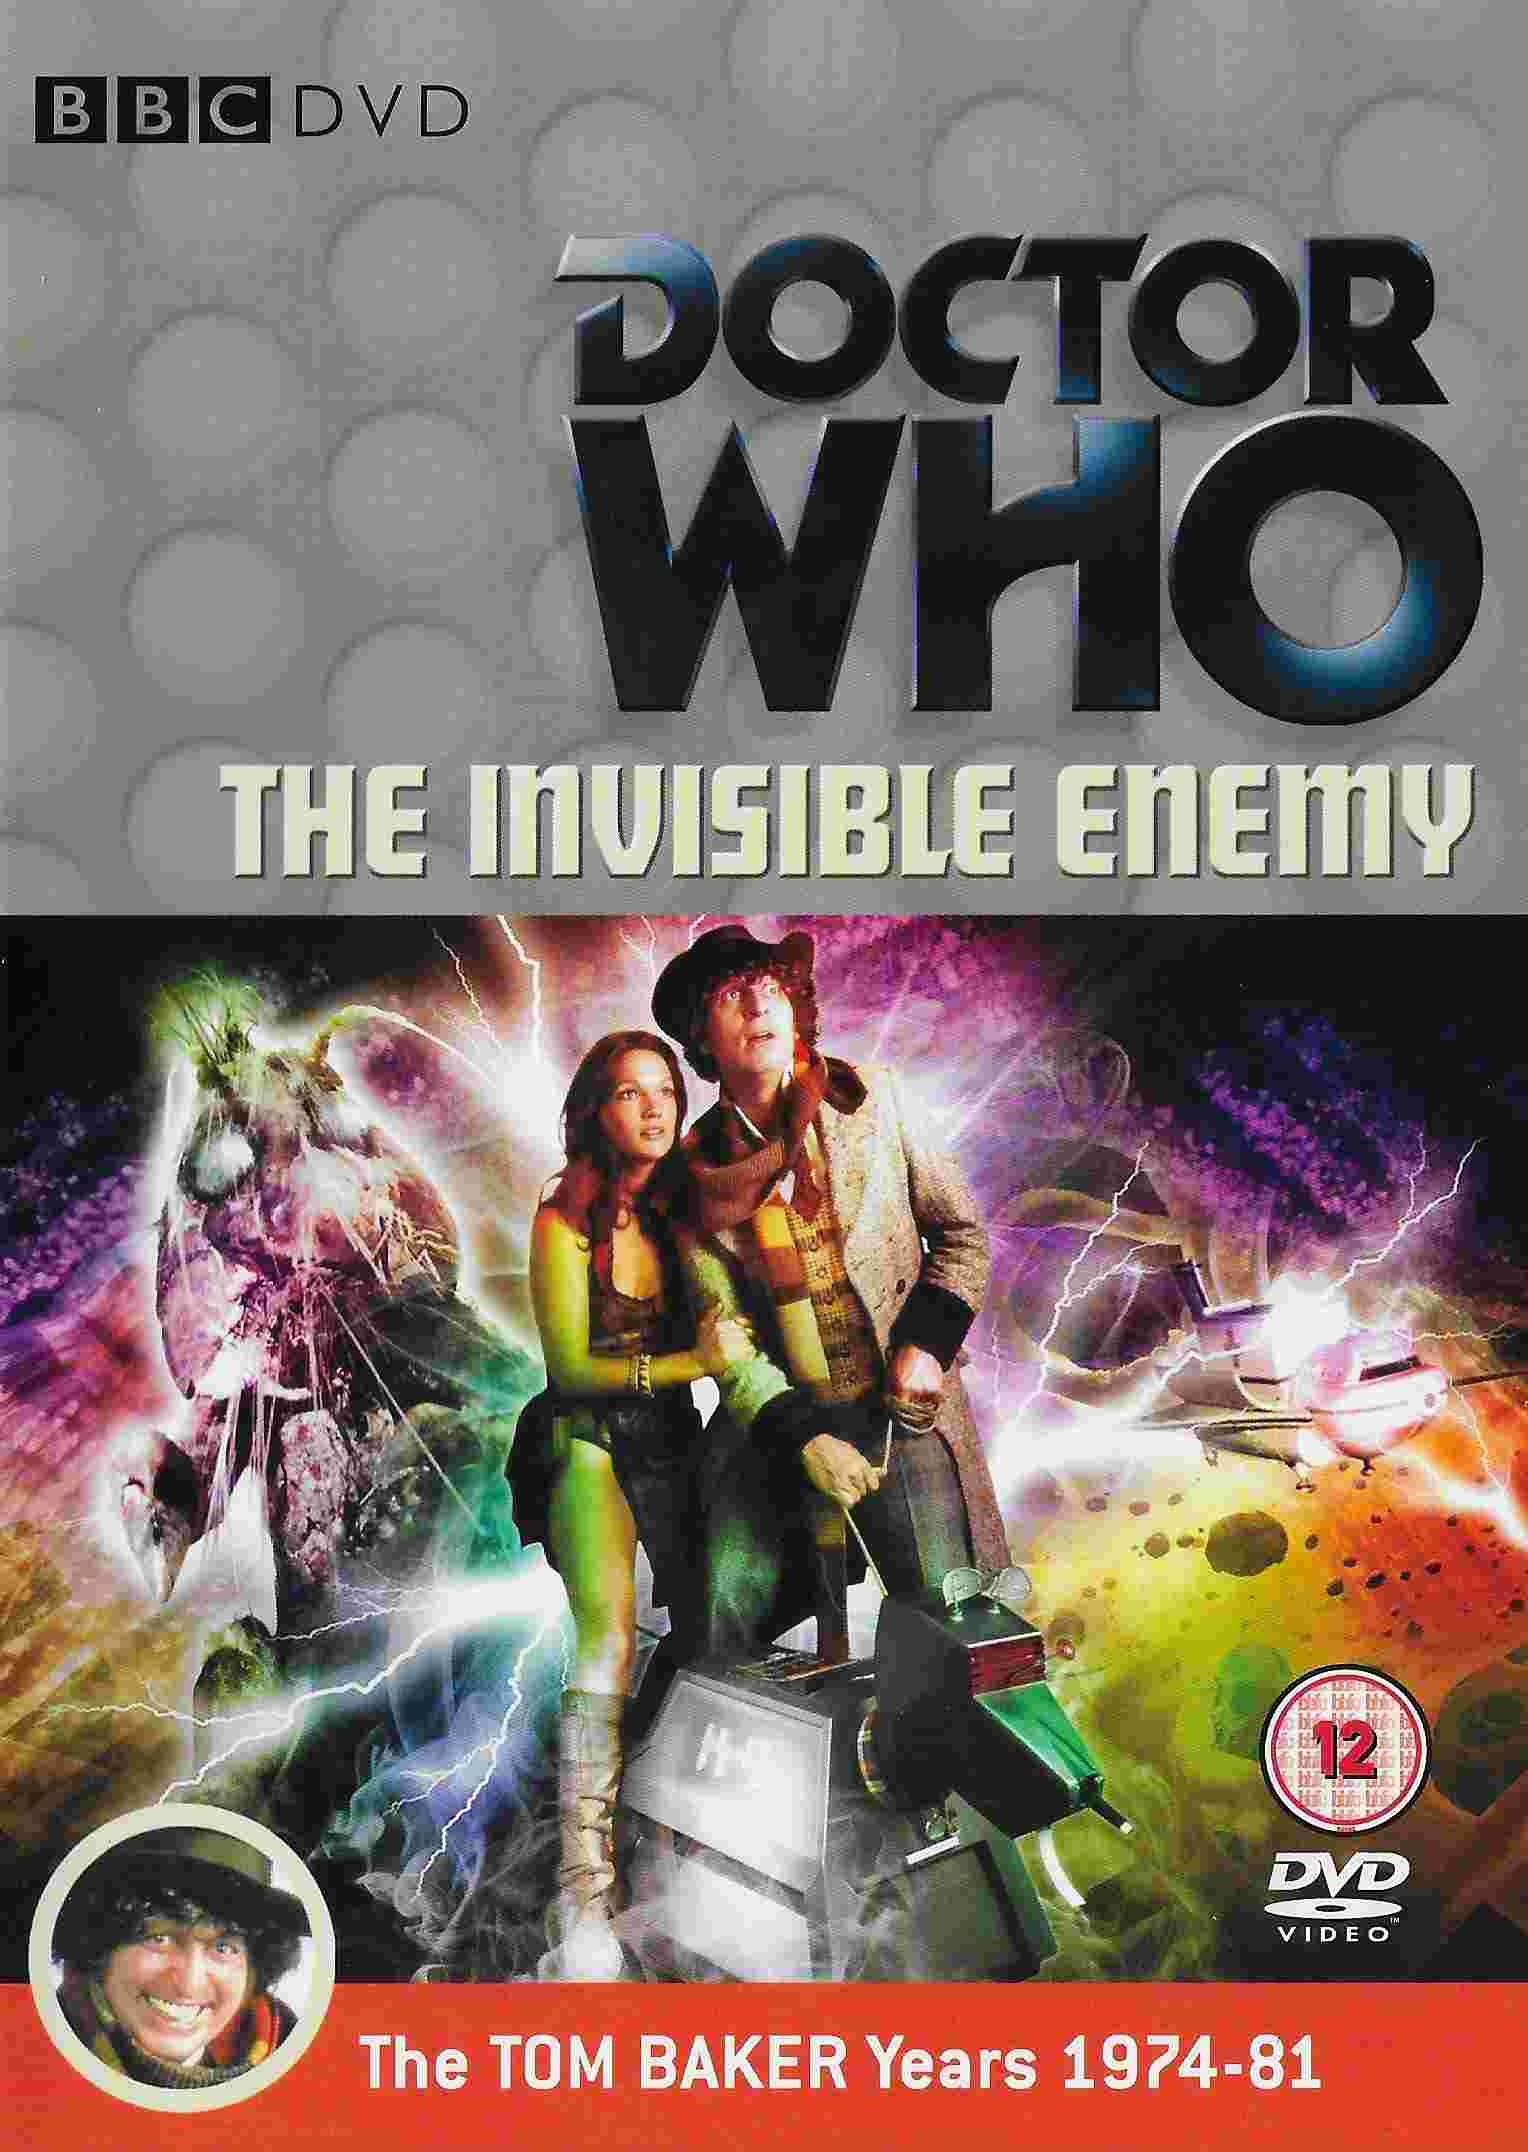 Picture of BBCDVD 2799 Doctor Who - The invisible enemy by artist Bob Baker / Dave Martin from the BBC records and Tapes library